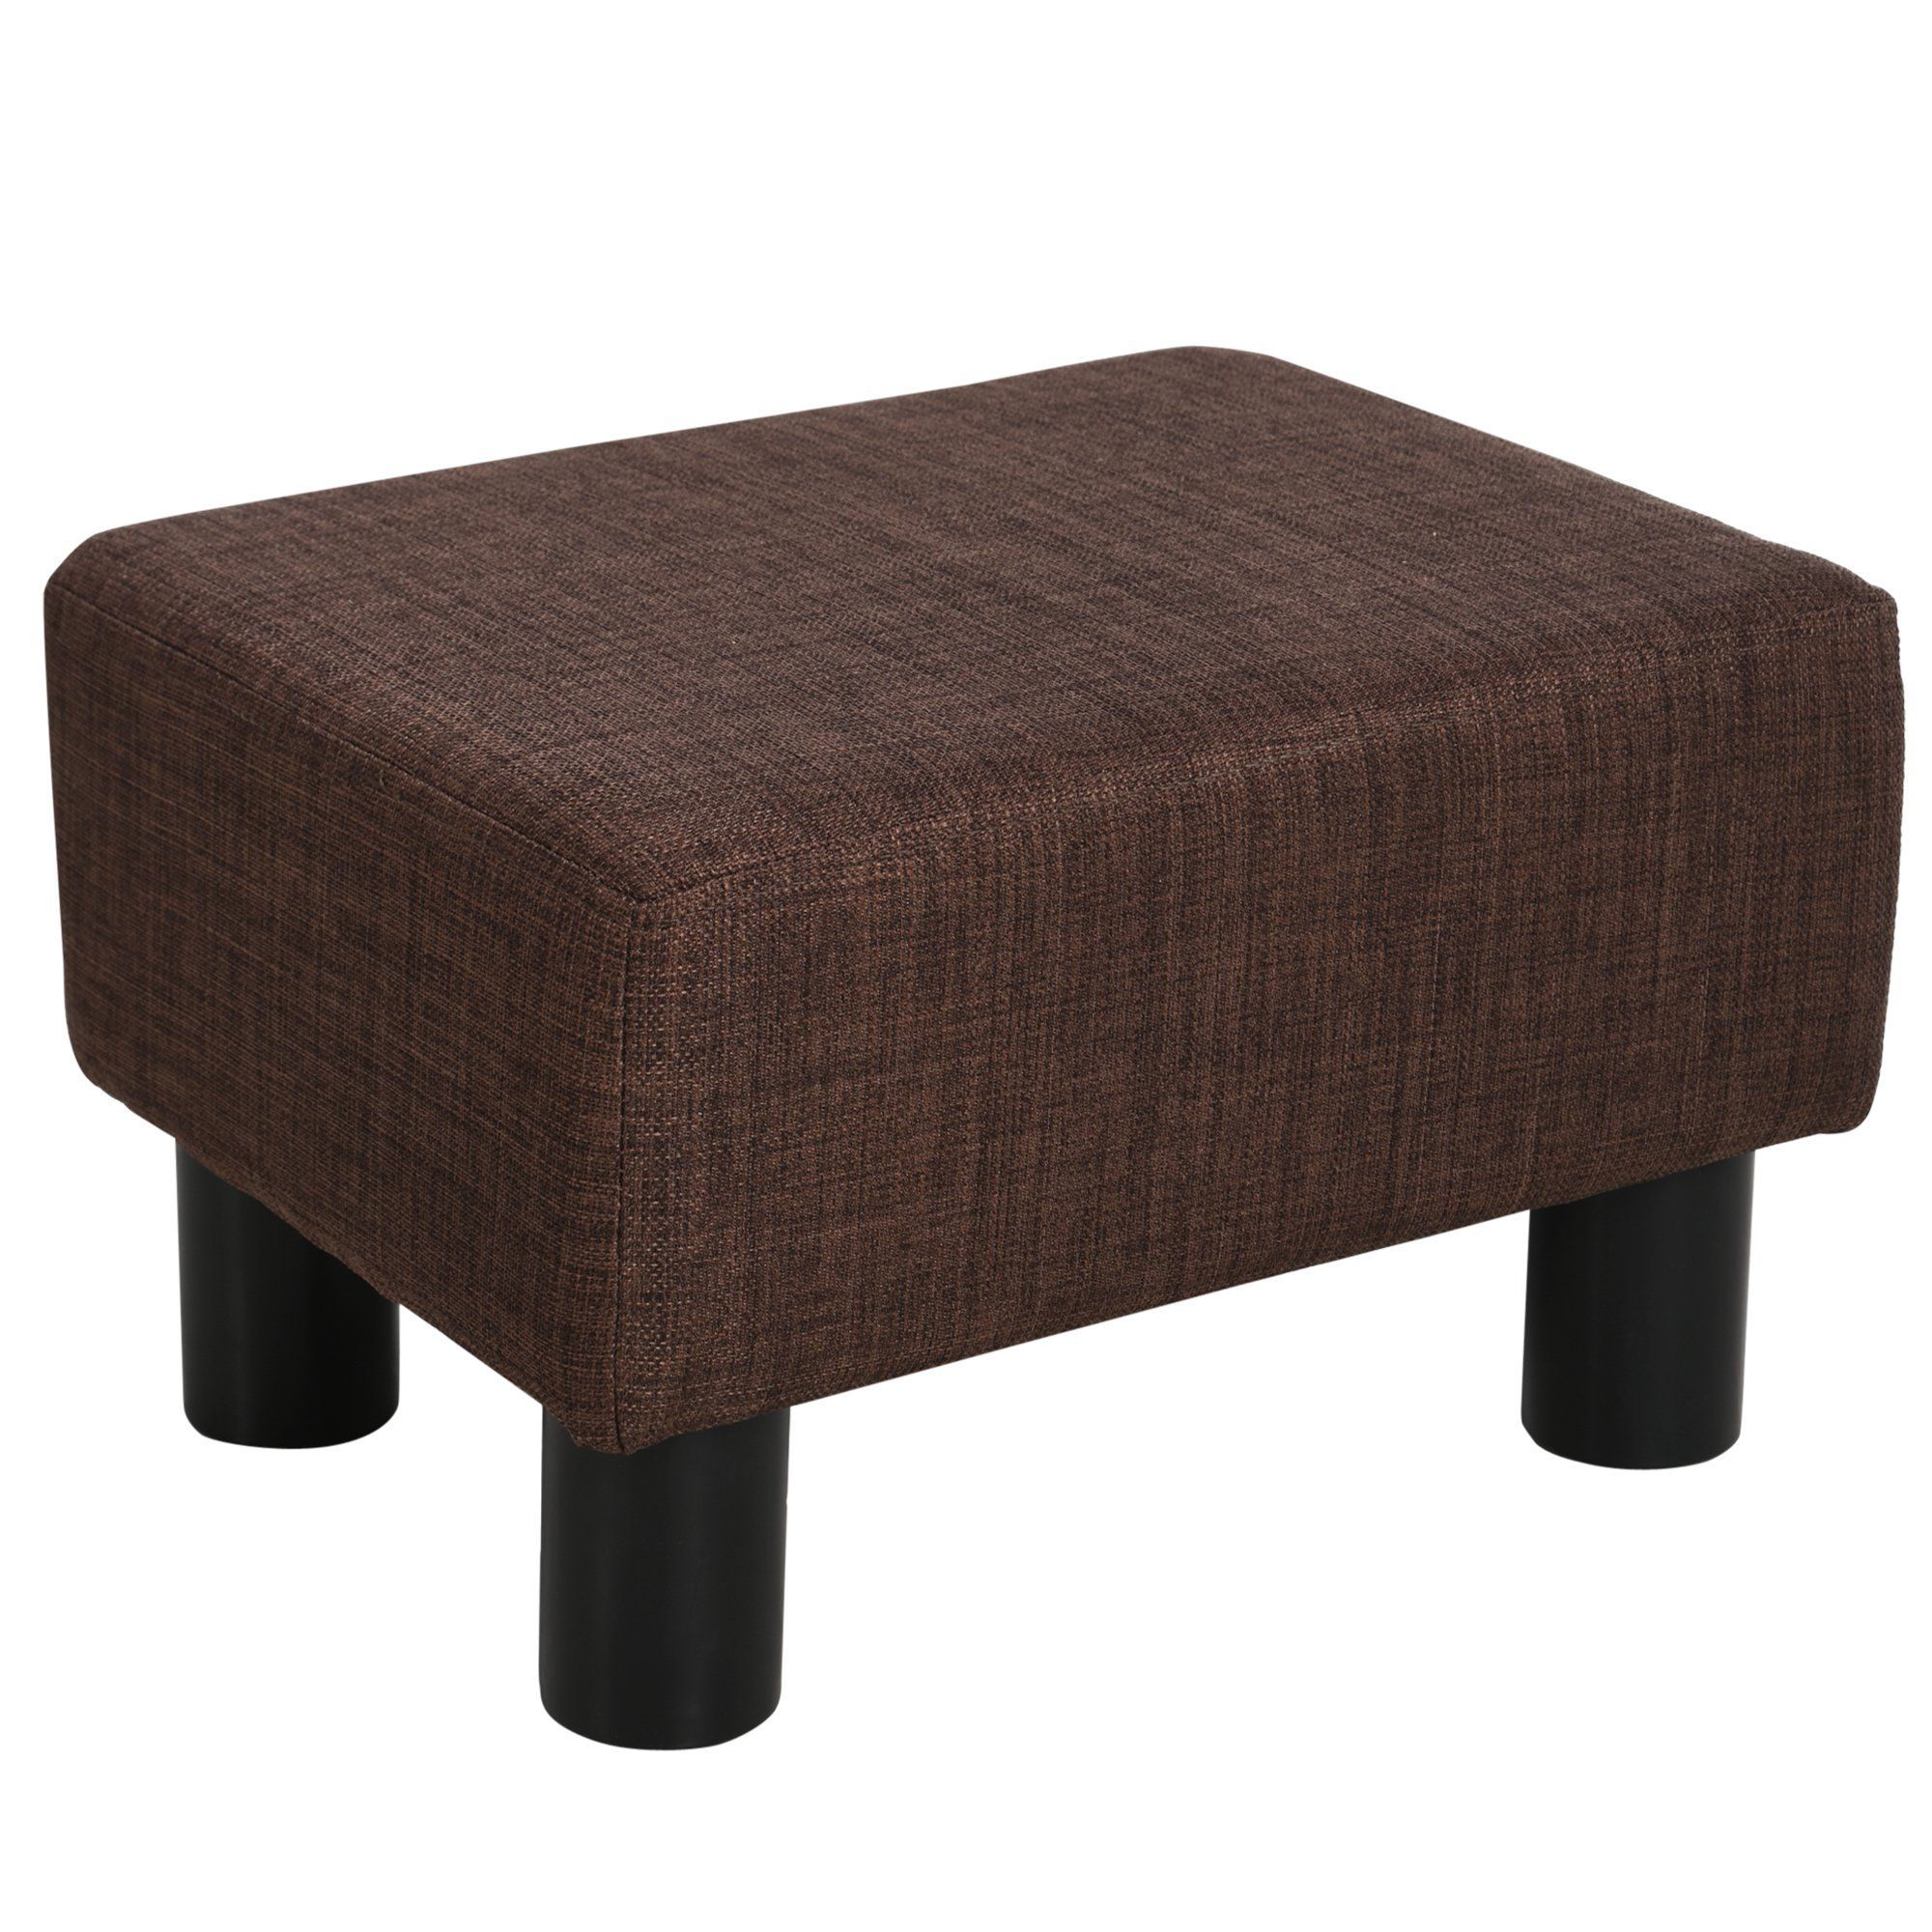 Homcom Linen Fabric Footstool Ottoman Cube W/ 4 Plastic Legs Black In Famous Black Fabric Ottomans With Fringe Trim (View 2 of 10)